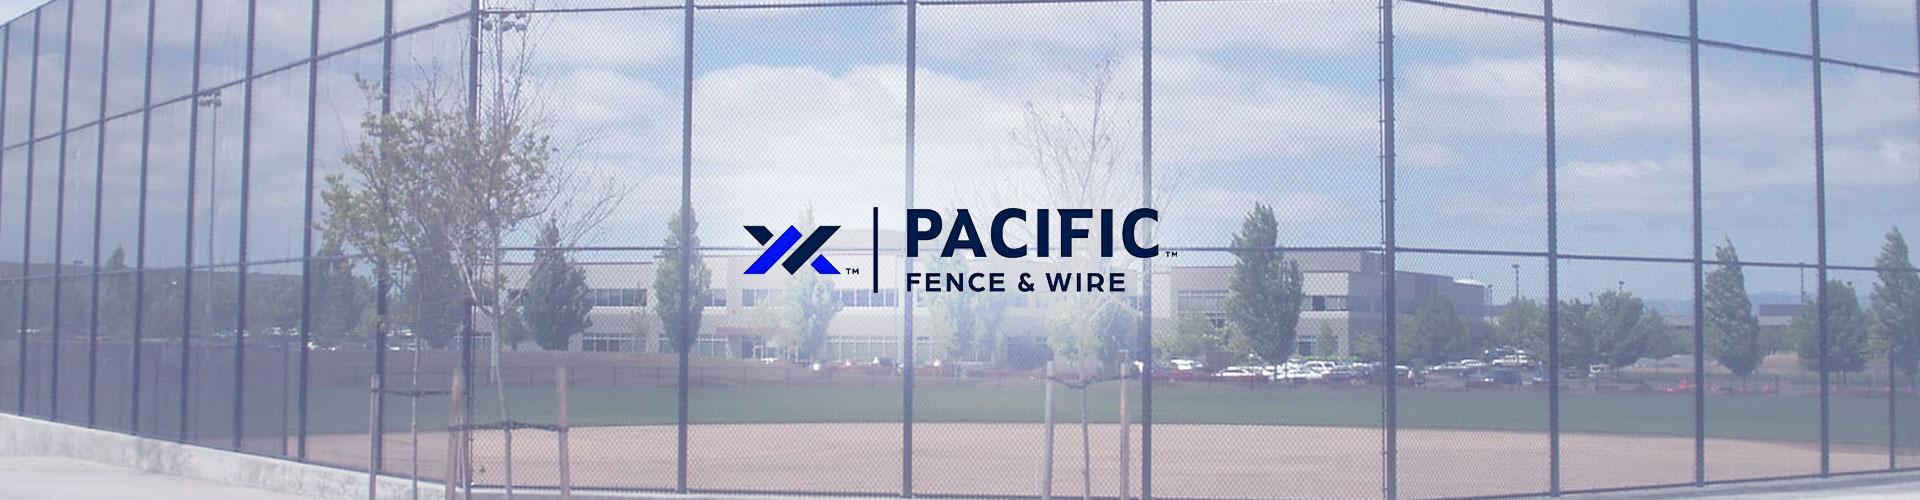 Case Study - Pacific Fence & Wire